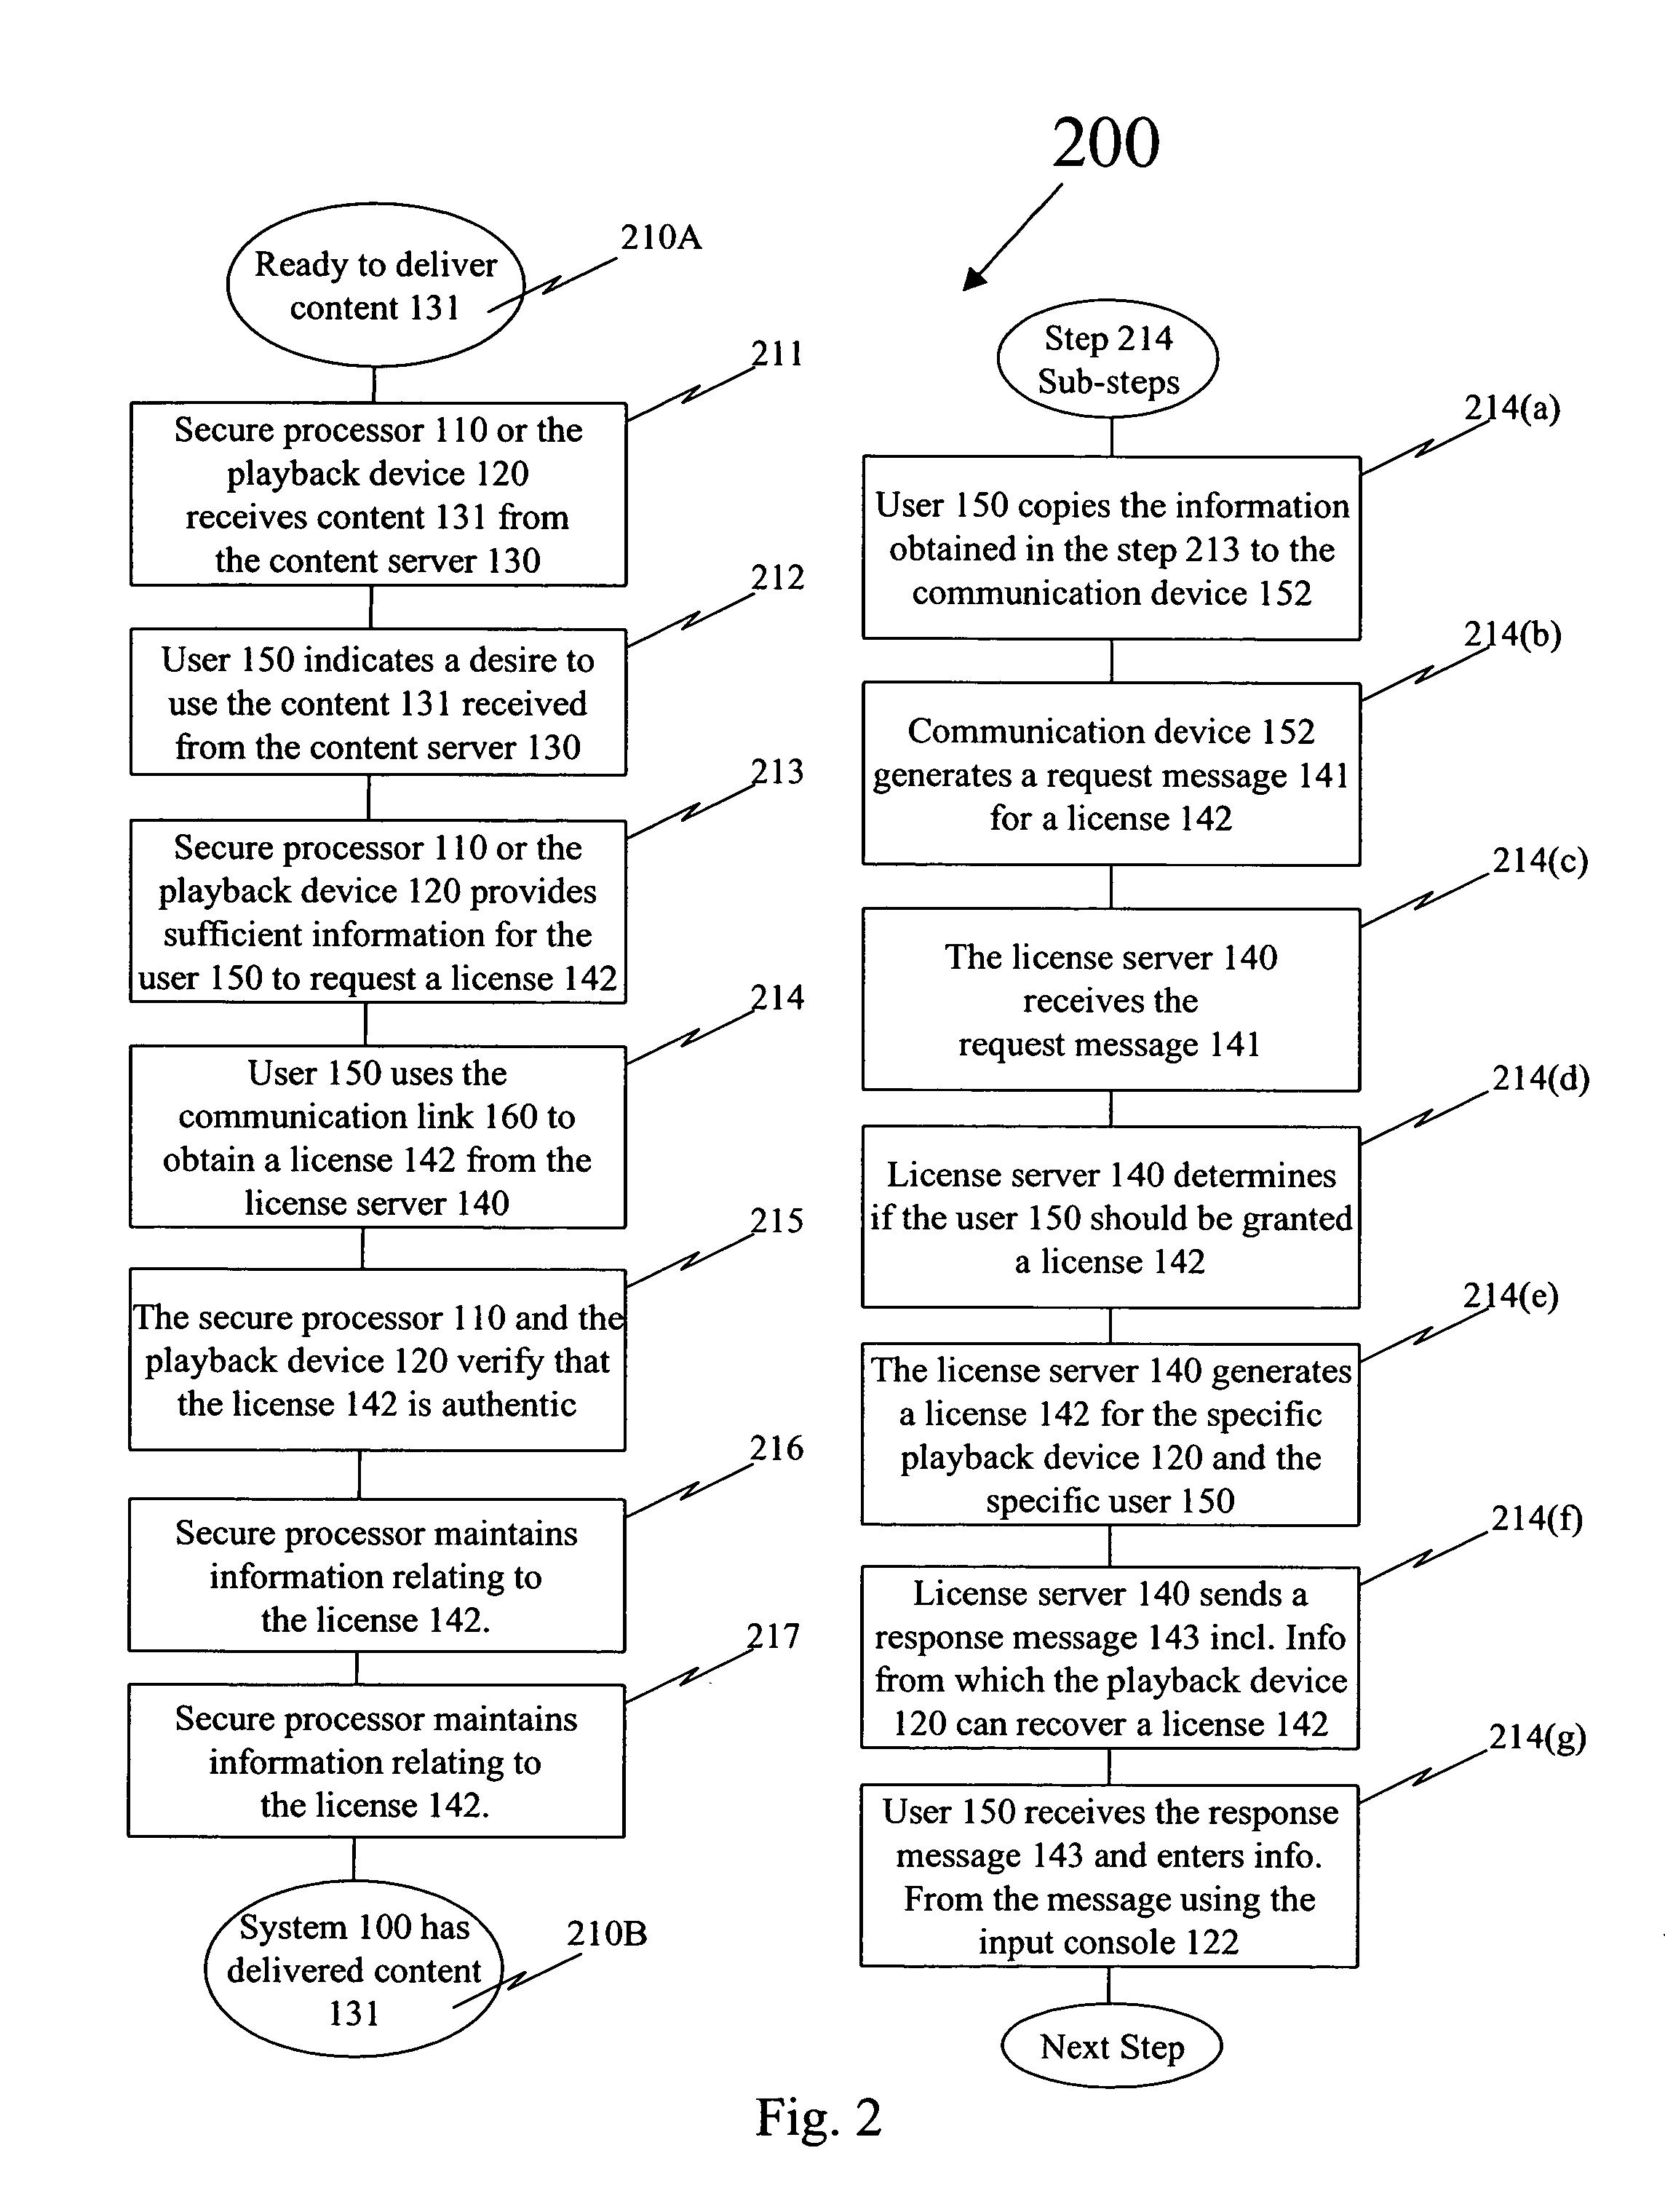 Delivery of license information using a short messaging system protocol in a closed content distribution system